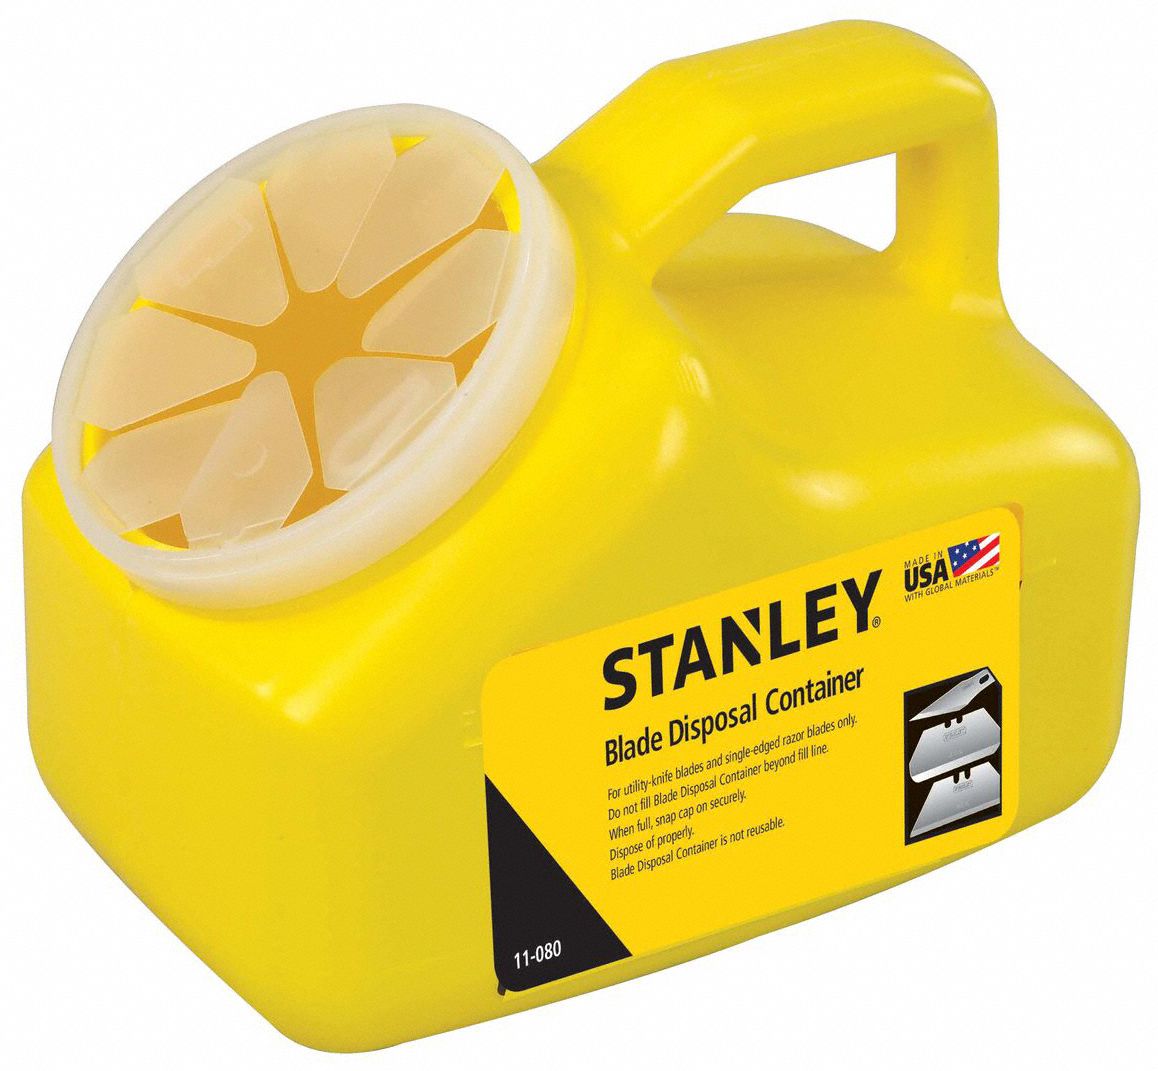 Blade Disposal Unit: Blade Disposal Container, Approximately (5000) Blades, Plastic, Yellow